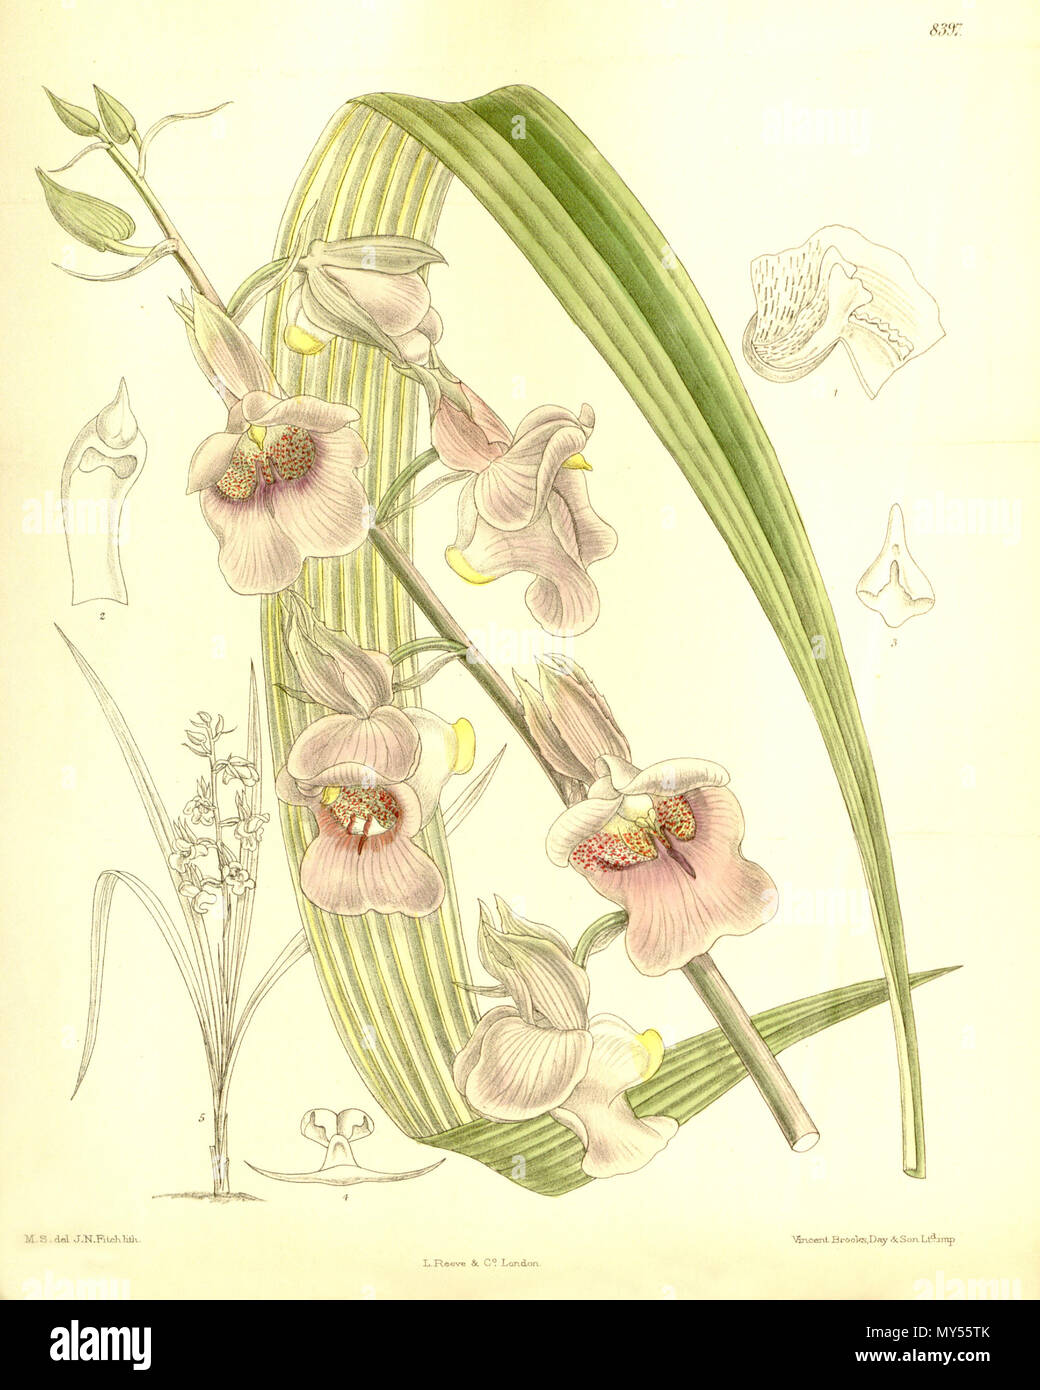 . Illustration of Eulophia cucullata (as syn. Lissochilus stylites) . 1911. M. S. del. ( = Matilda Smith, 1854-1926), J. N. Fitch lith. ( = John Nugent Fitch, 1840–1927) Description by R. A. Rolfe (1855–1921) 171 Eulophia cucullata (as Lissochilus stylites) - Curtis' 137 (Ser. 4 no. 7) pl. 8397 (1911) Stock Photo